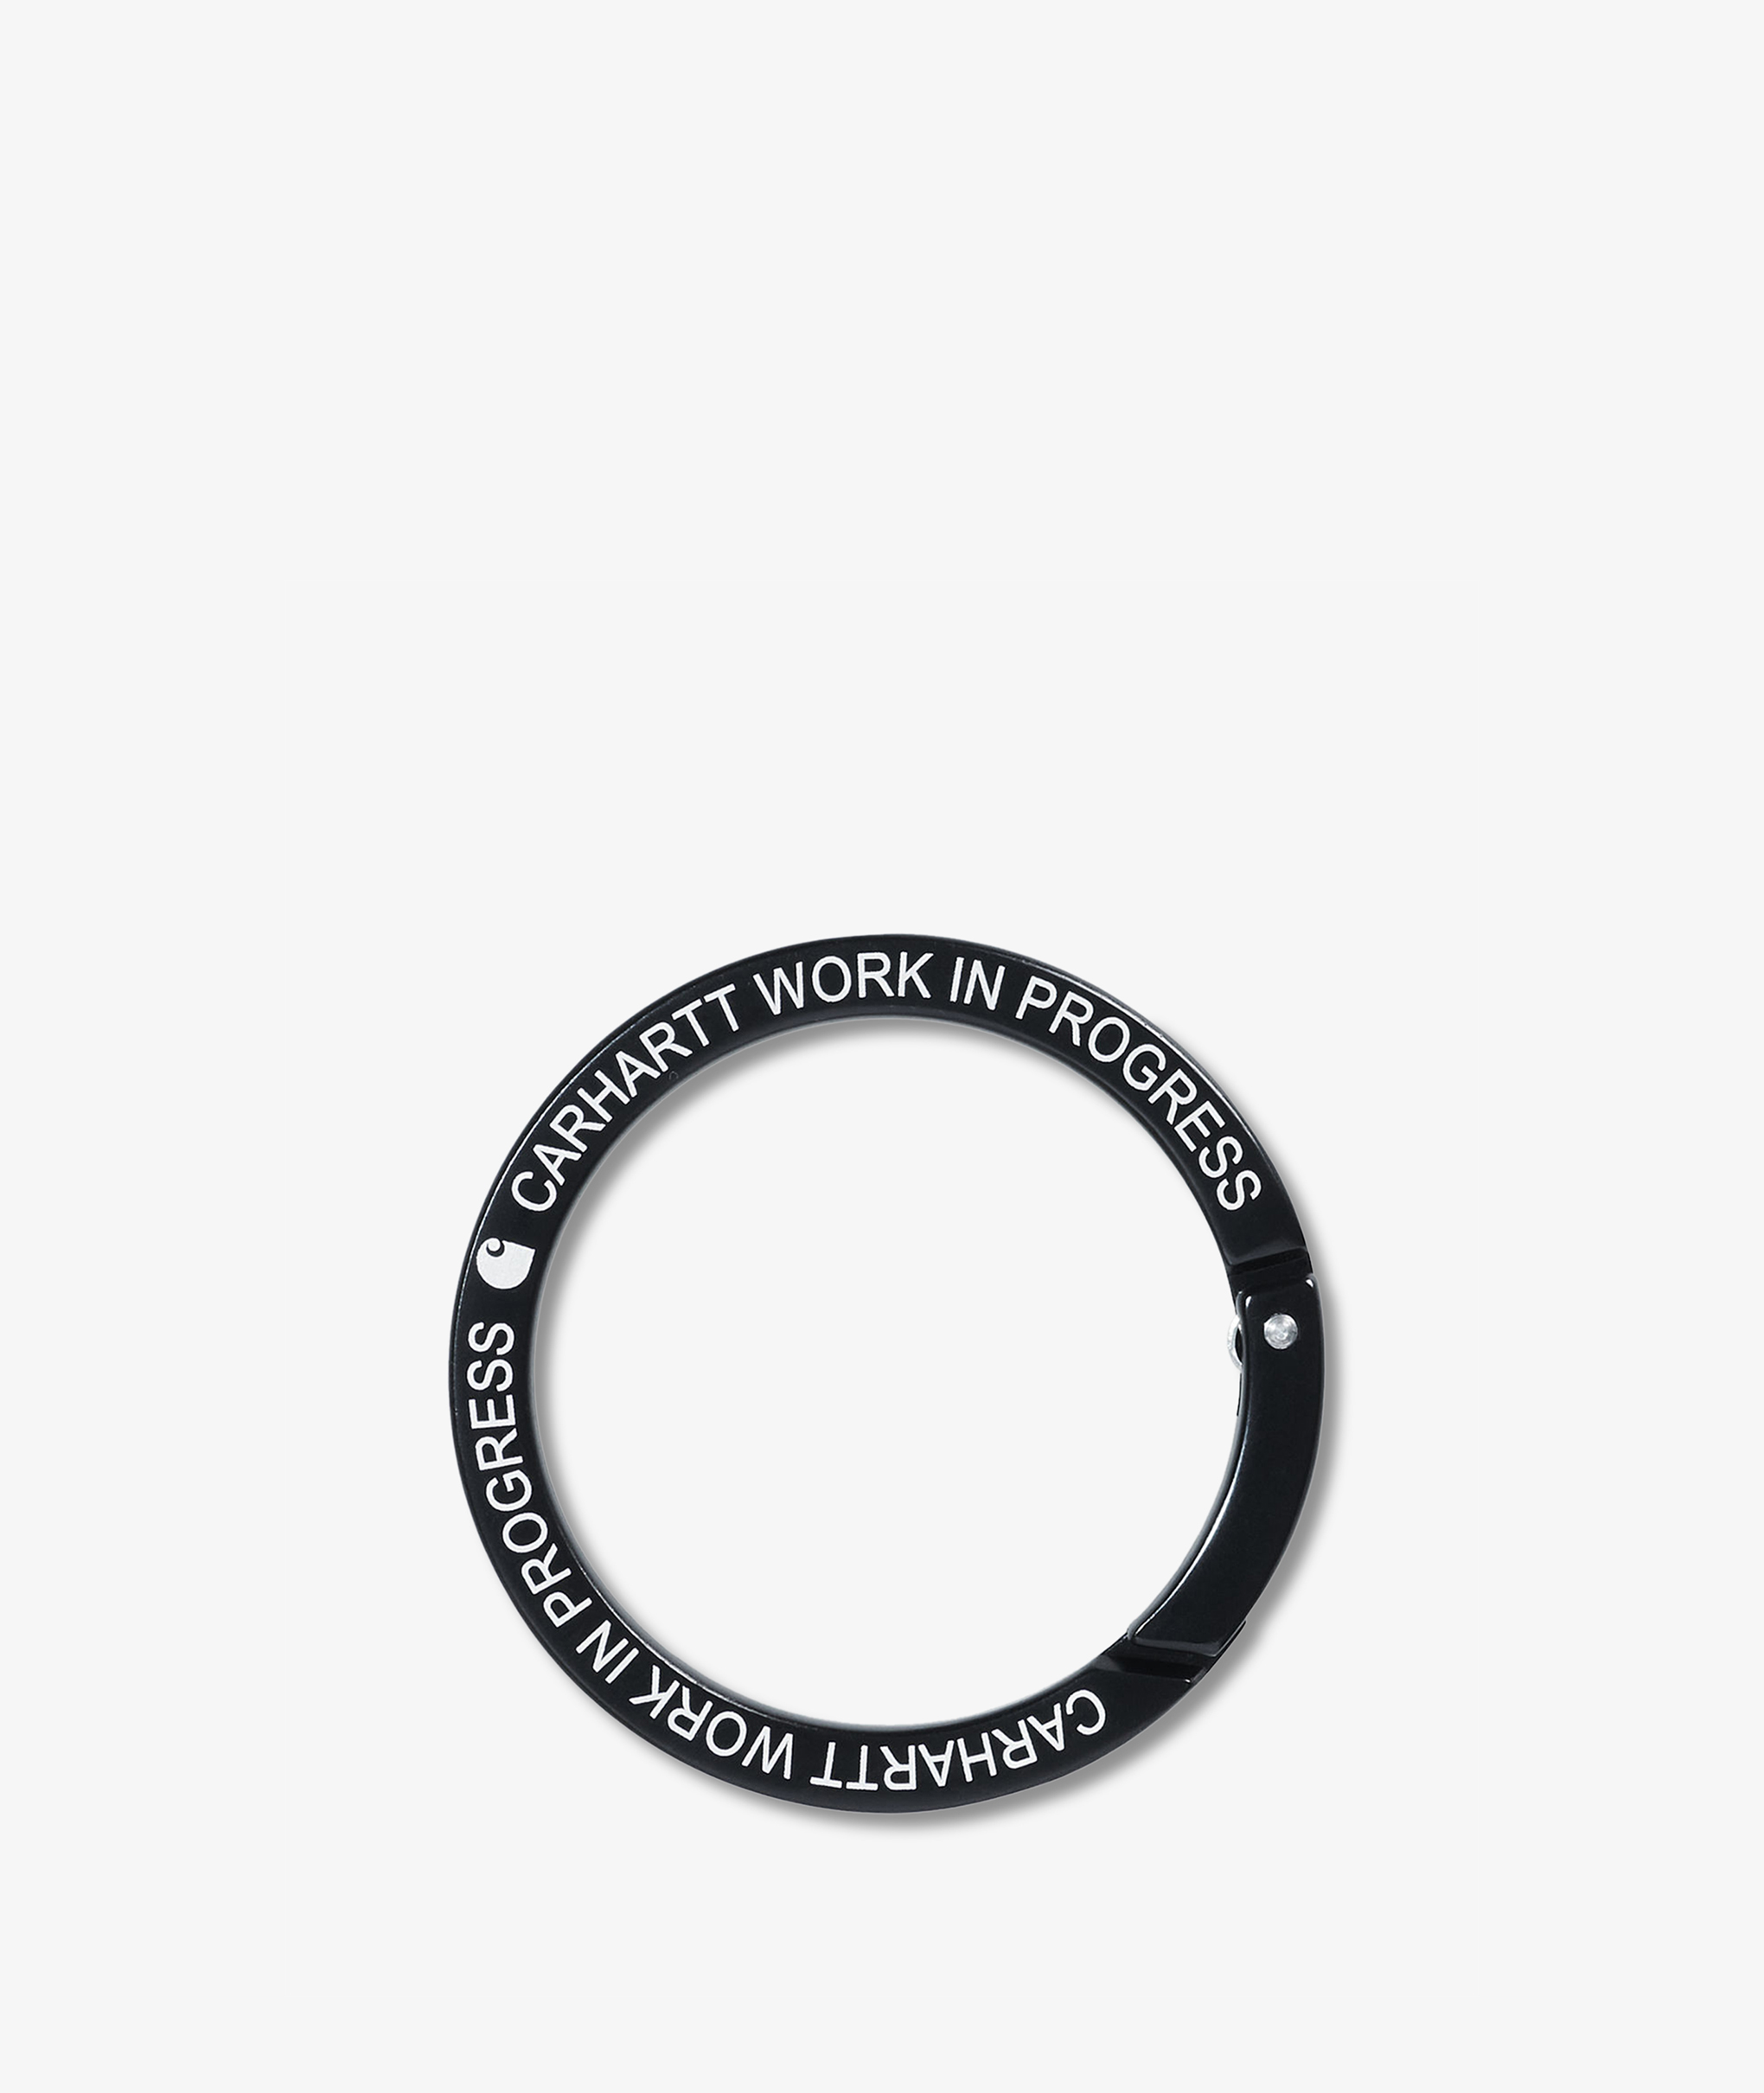 Norse Store  Shipping Worldwide - Carhartt WIP Round Carabiner - Alloy  Black